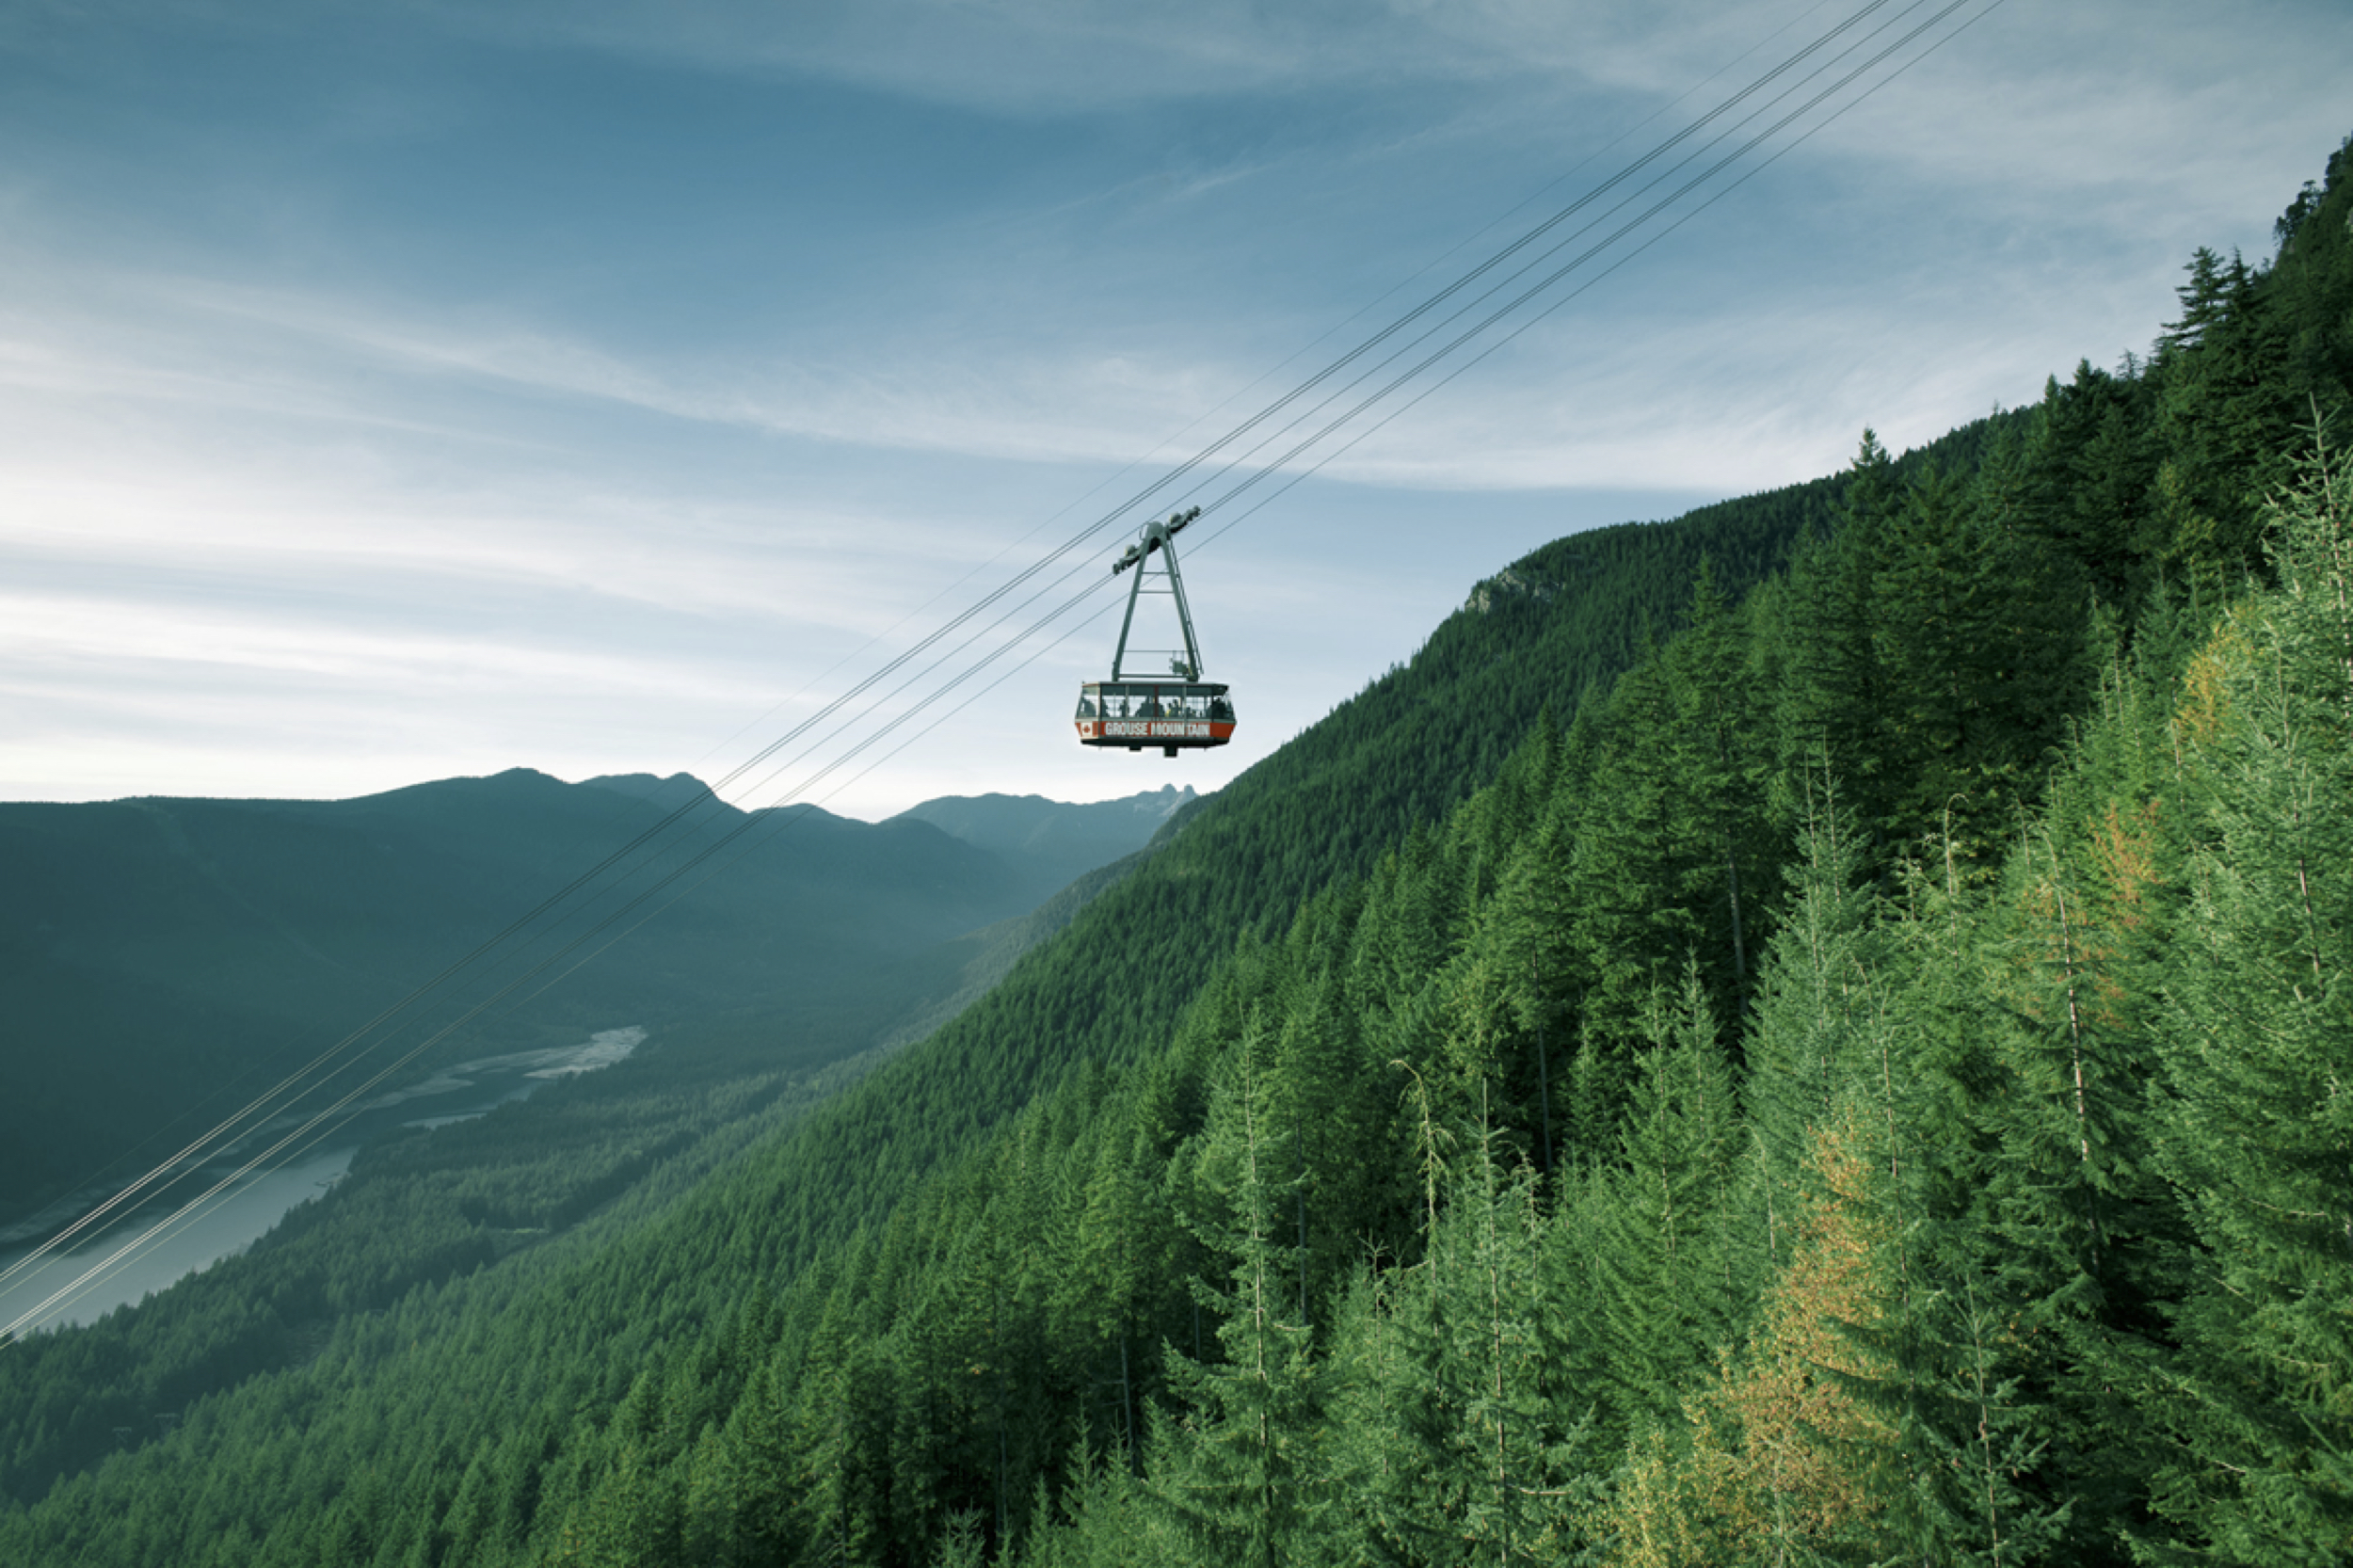 Grouse Mountain tramway over trees